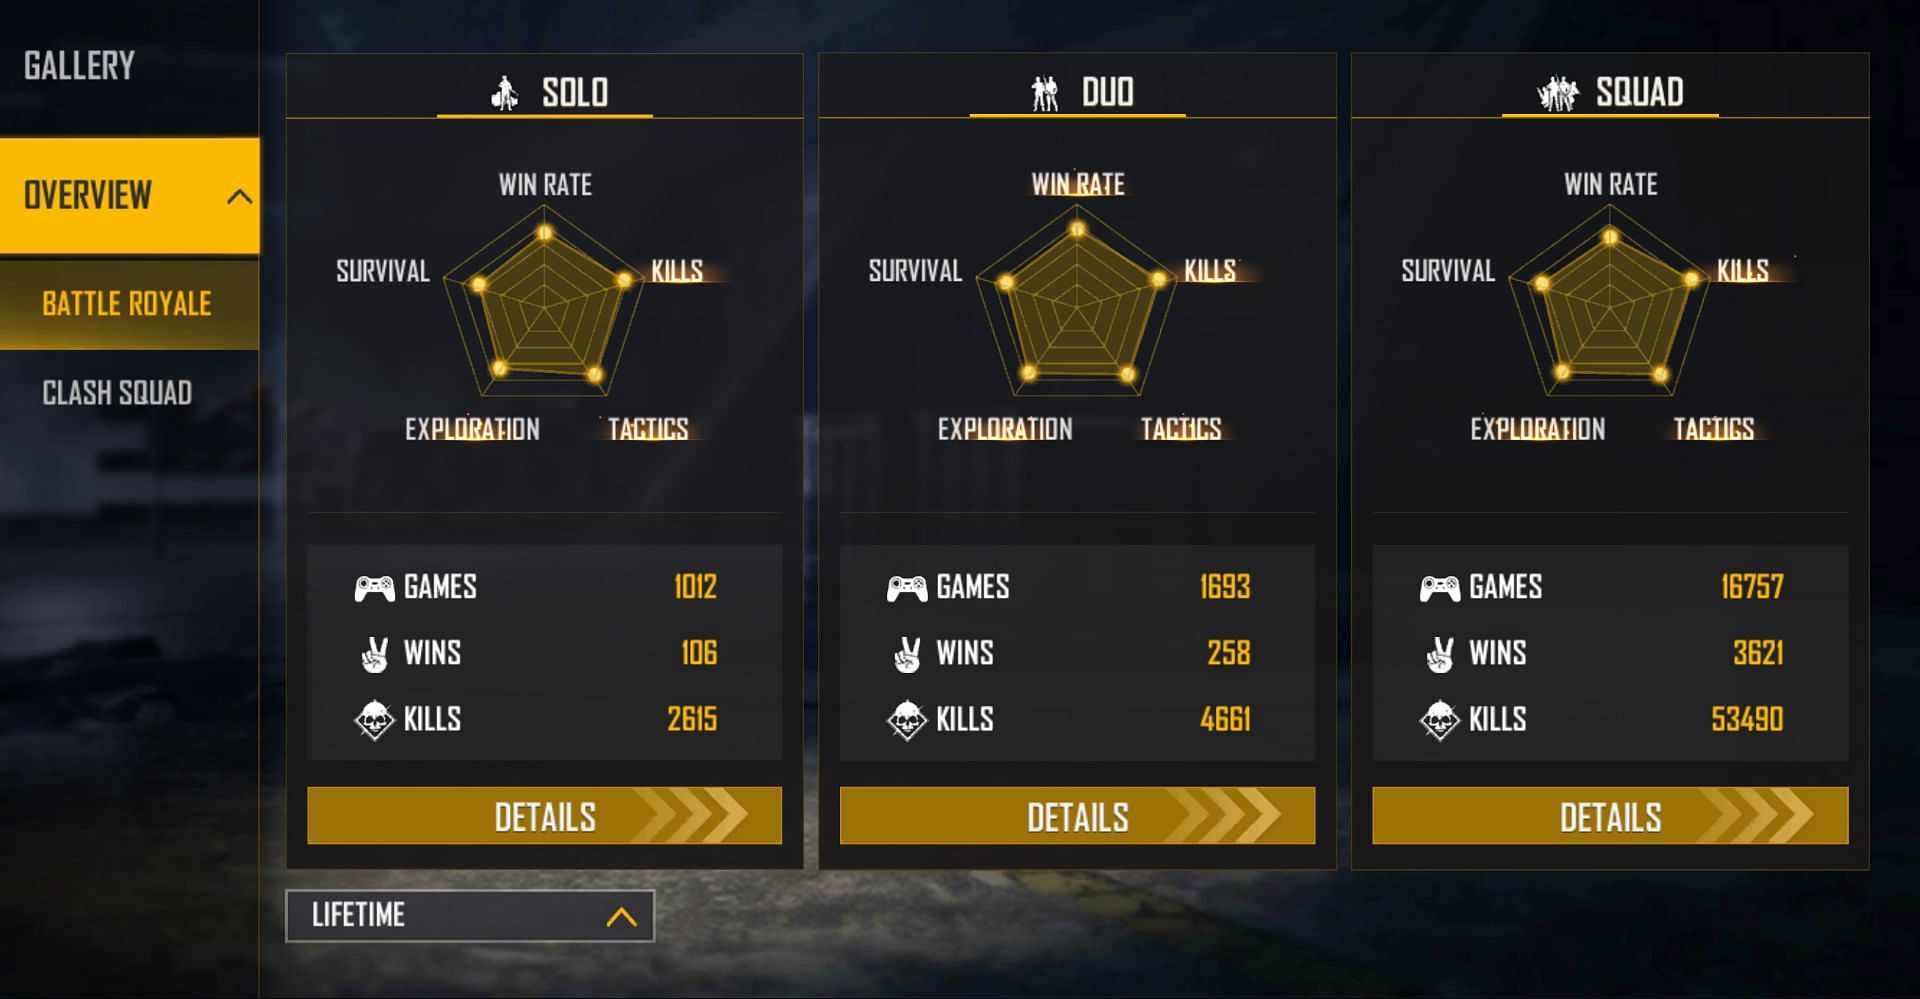 Pratham has 3621 wins in squad matches (Image via Free Fire)